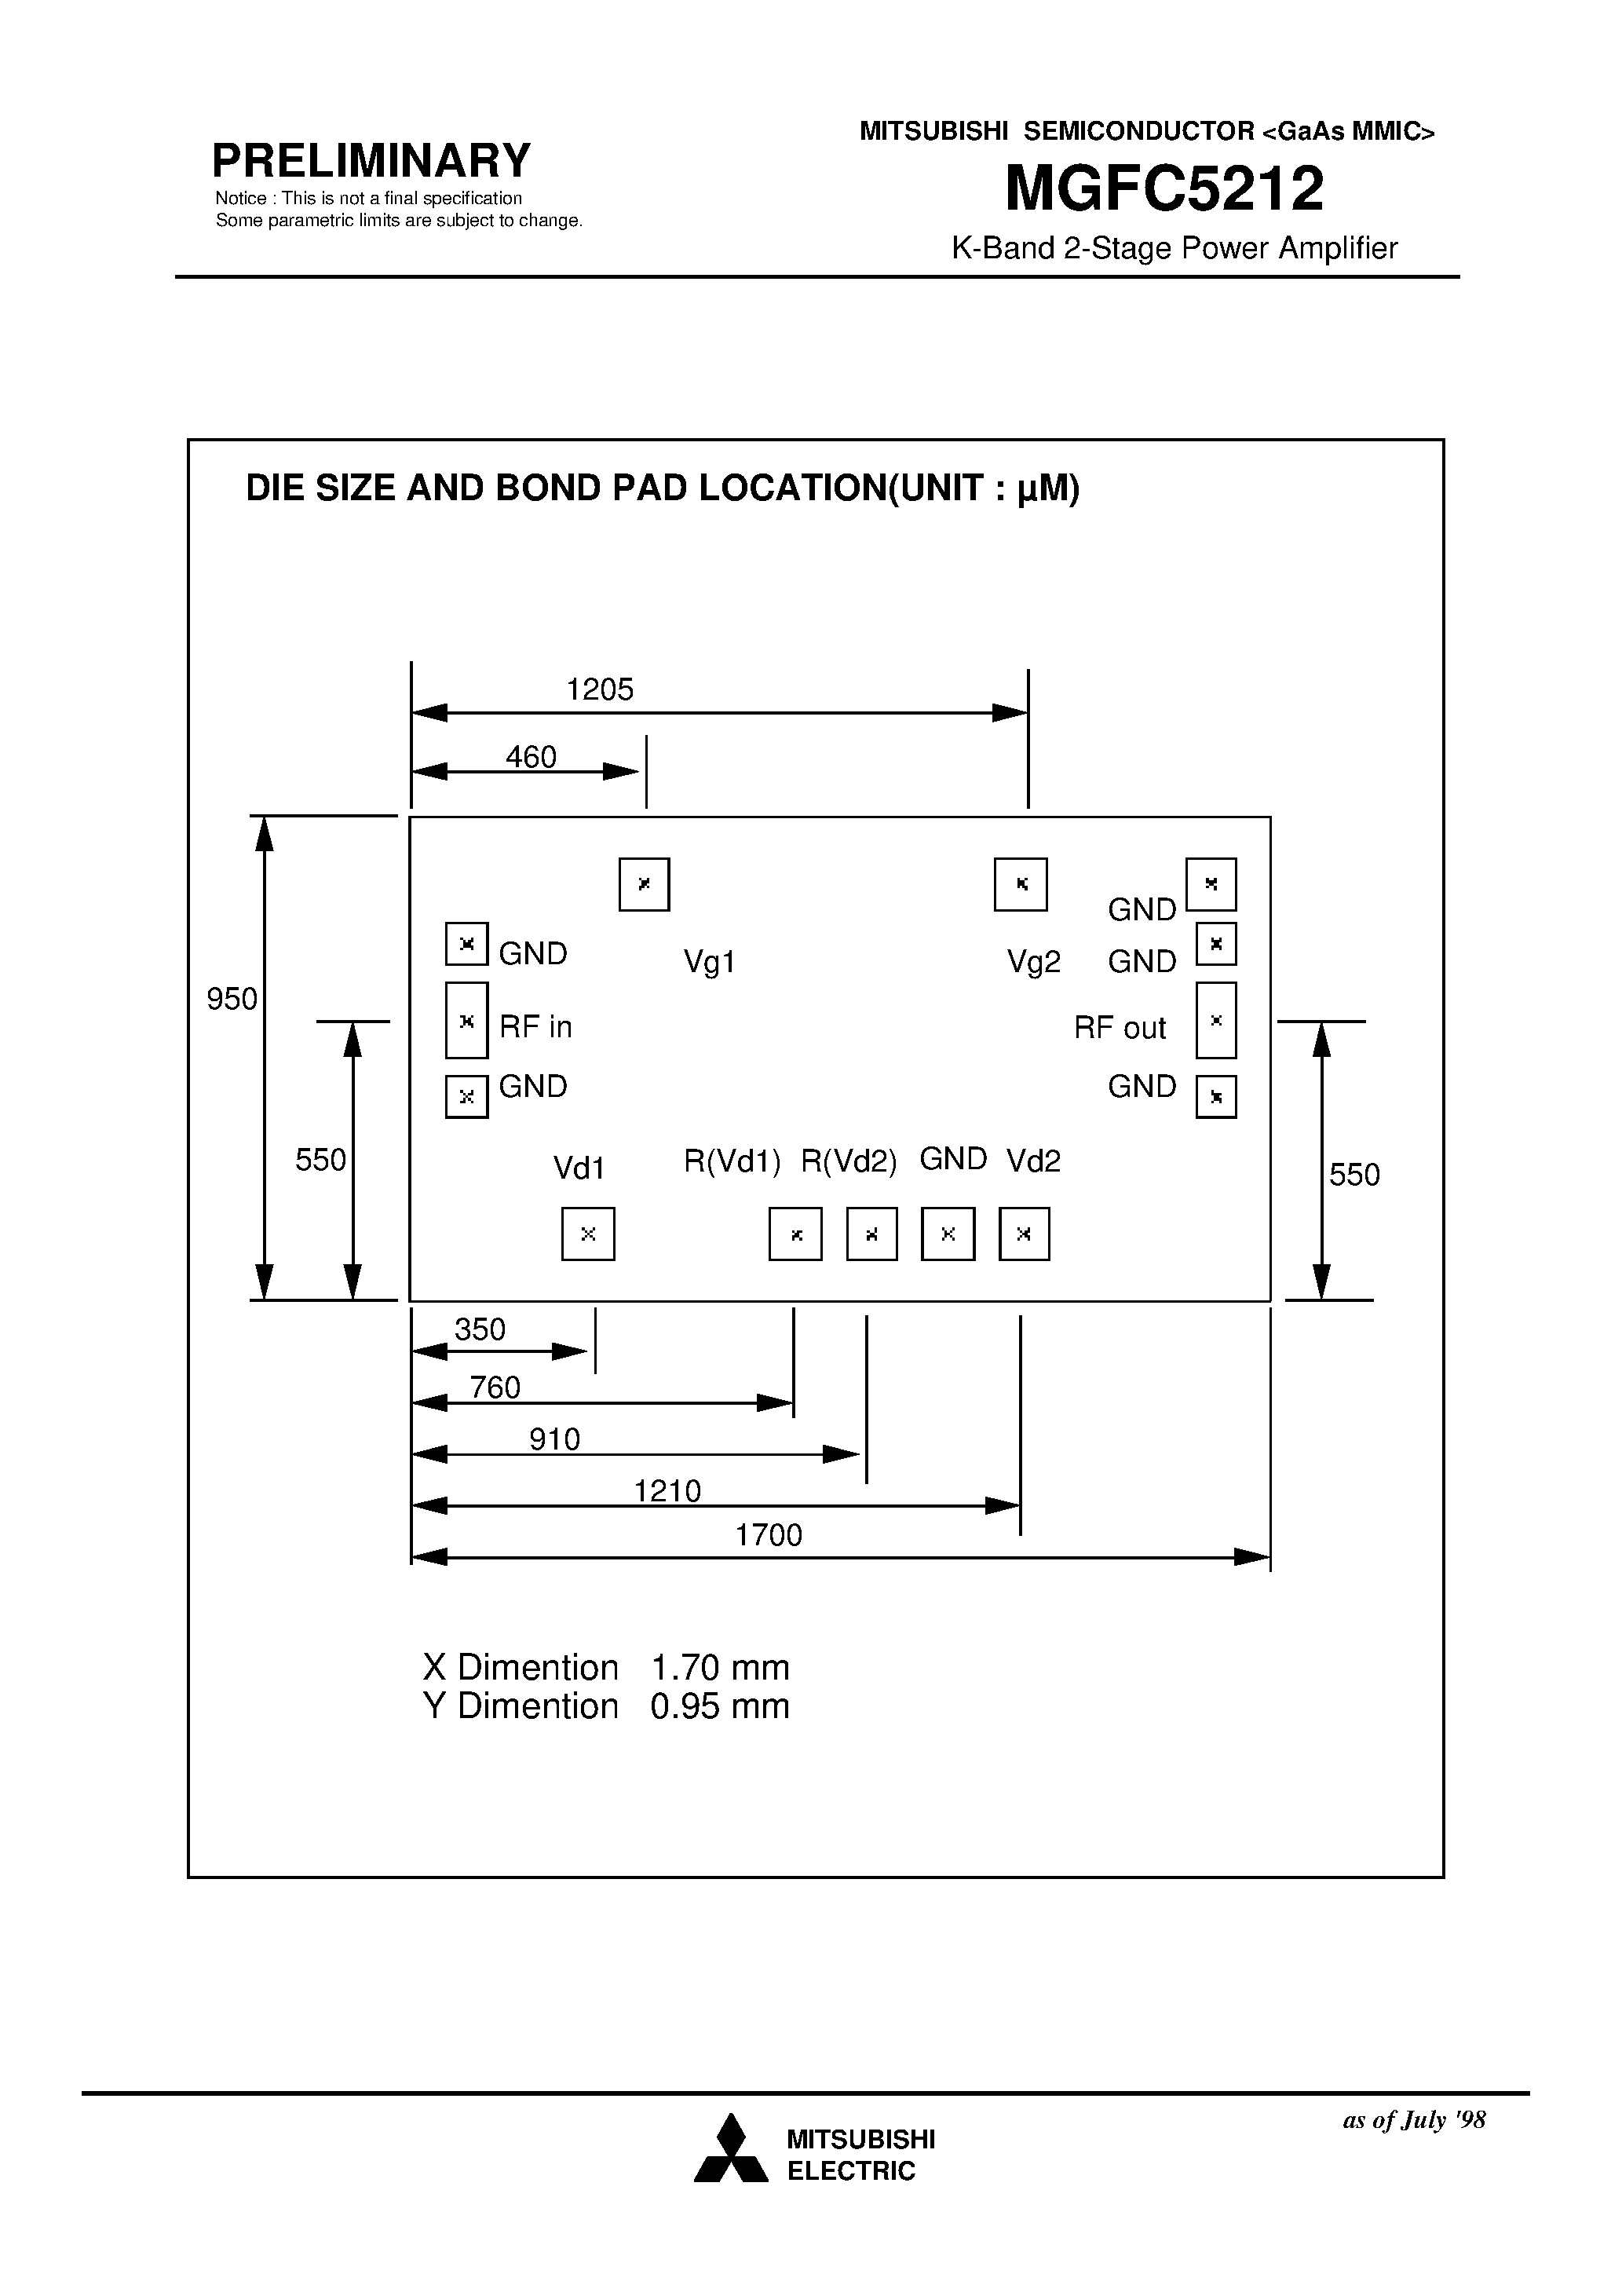 Datasheet MGFC5212 - K-Band 2-Stage Power Amplifier page 2